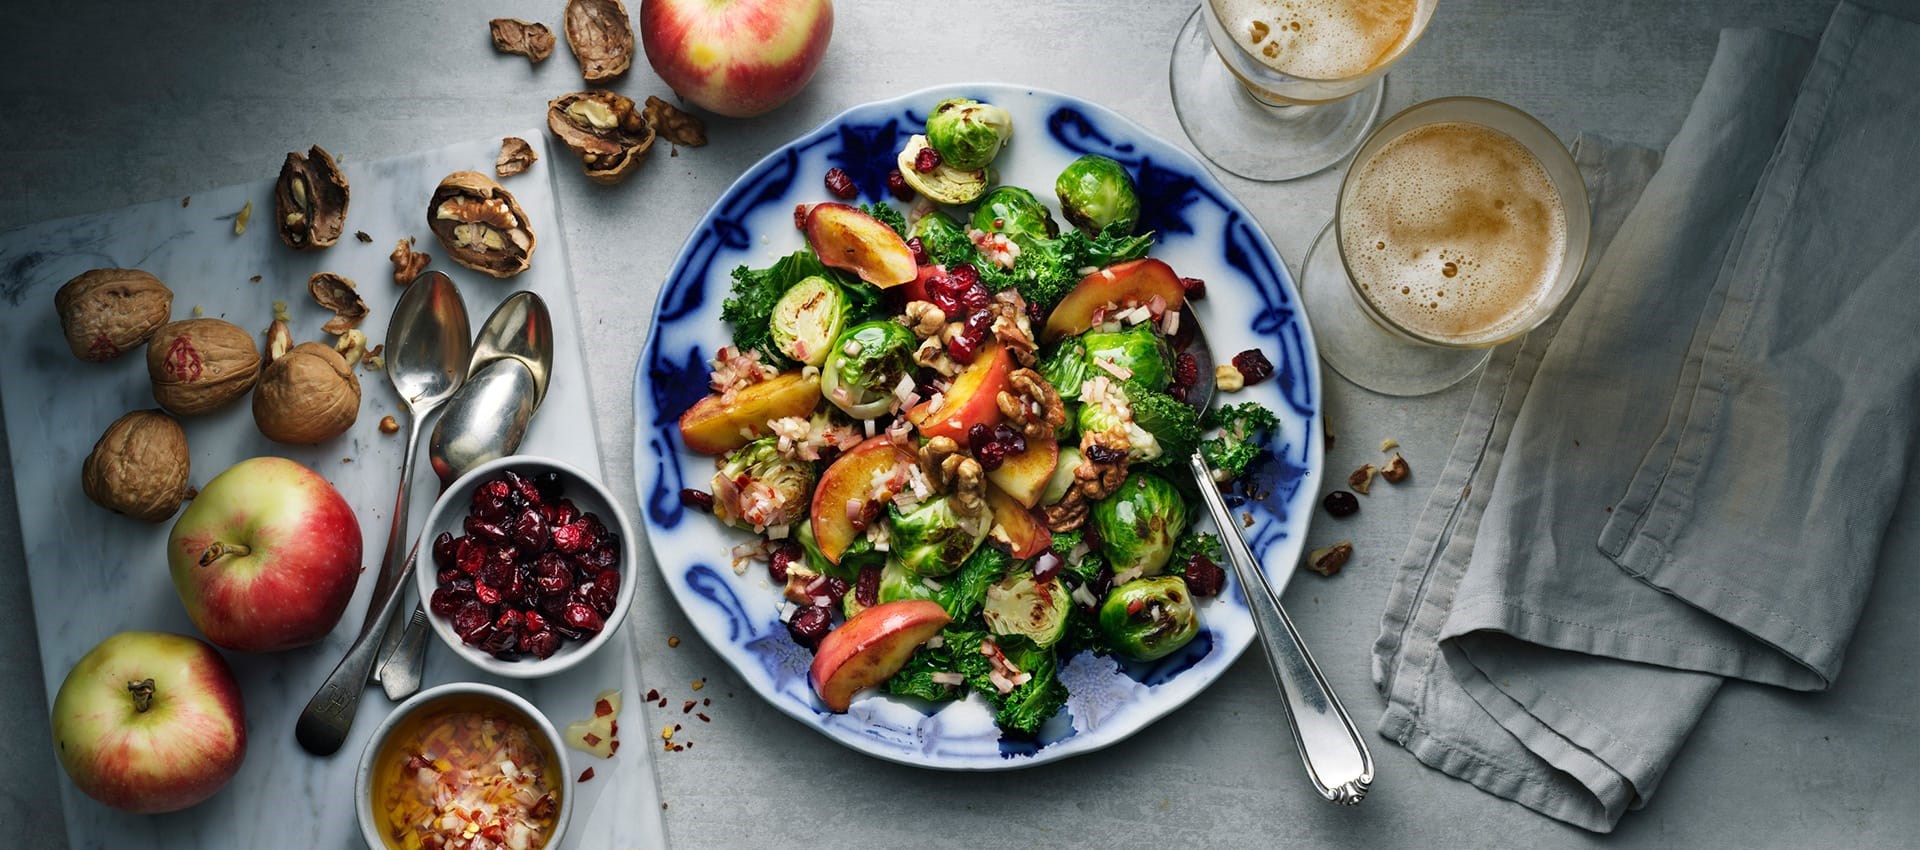 Salad with brussels sprouts, kale, apple and walnuts on a large plate